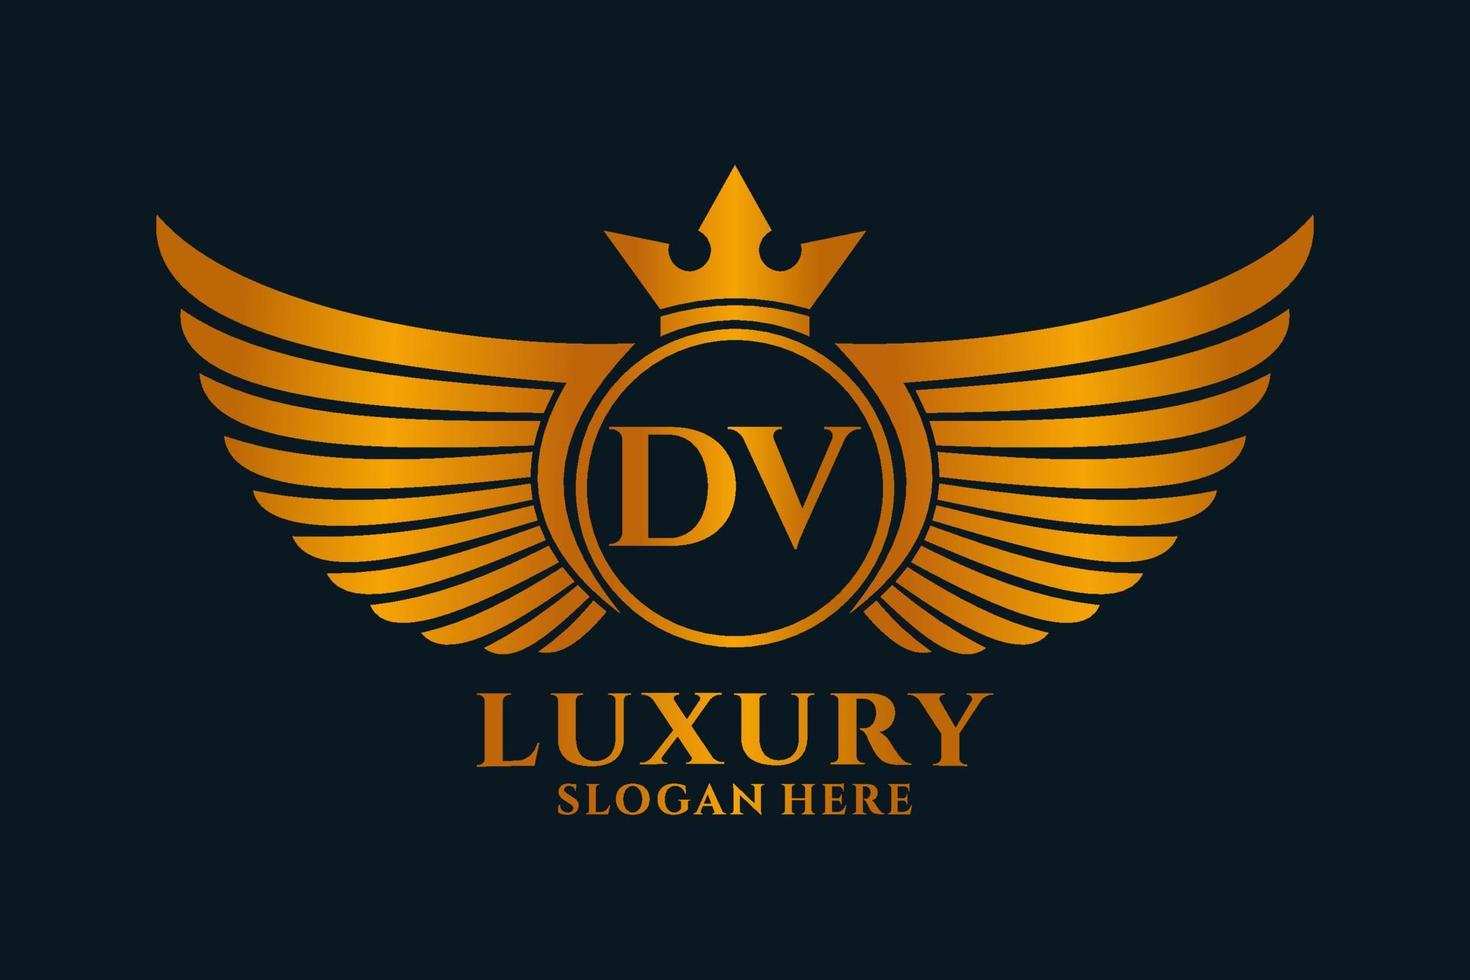 Luxury royal wing Letter DV crest Gold color Logo vector, Victory logo, crest logo, wing logo, vector logo template.